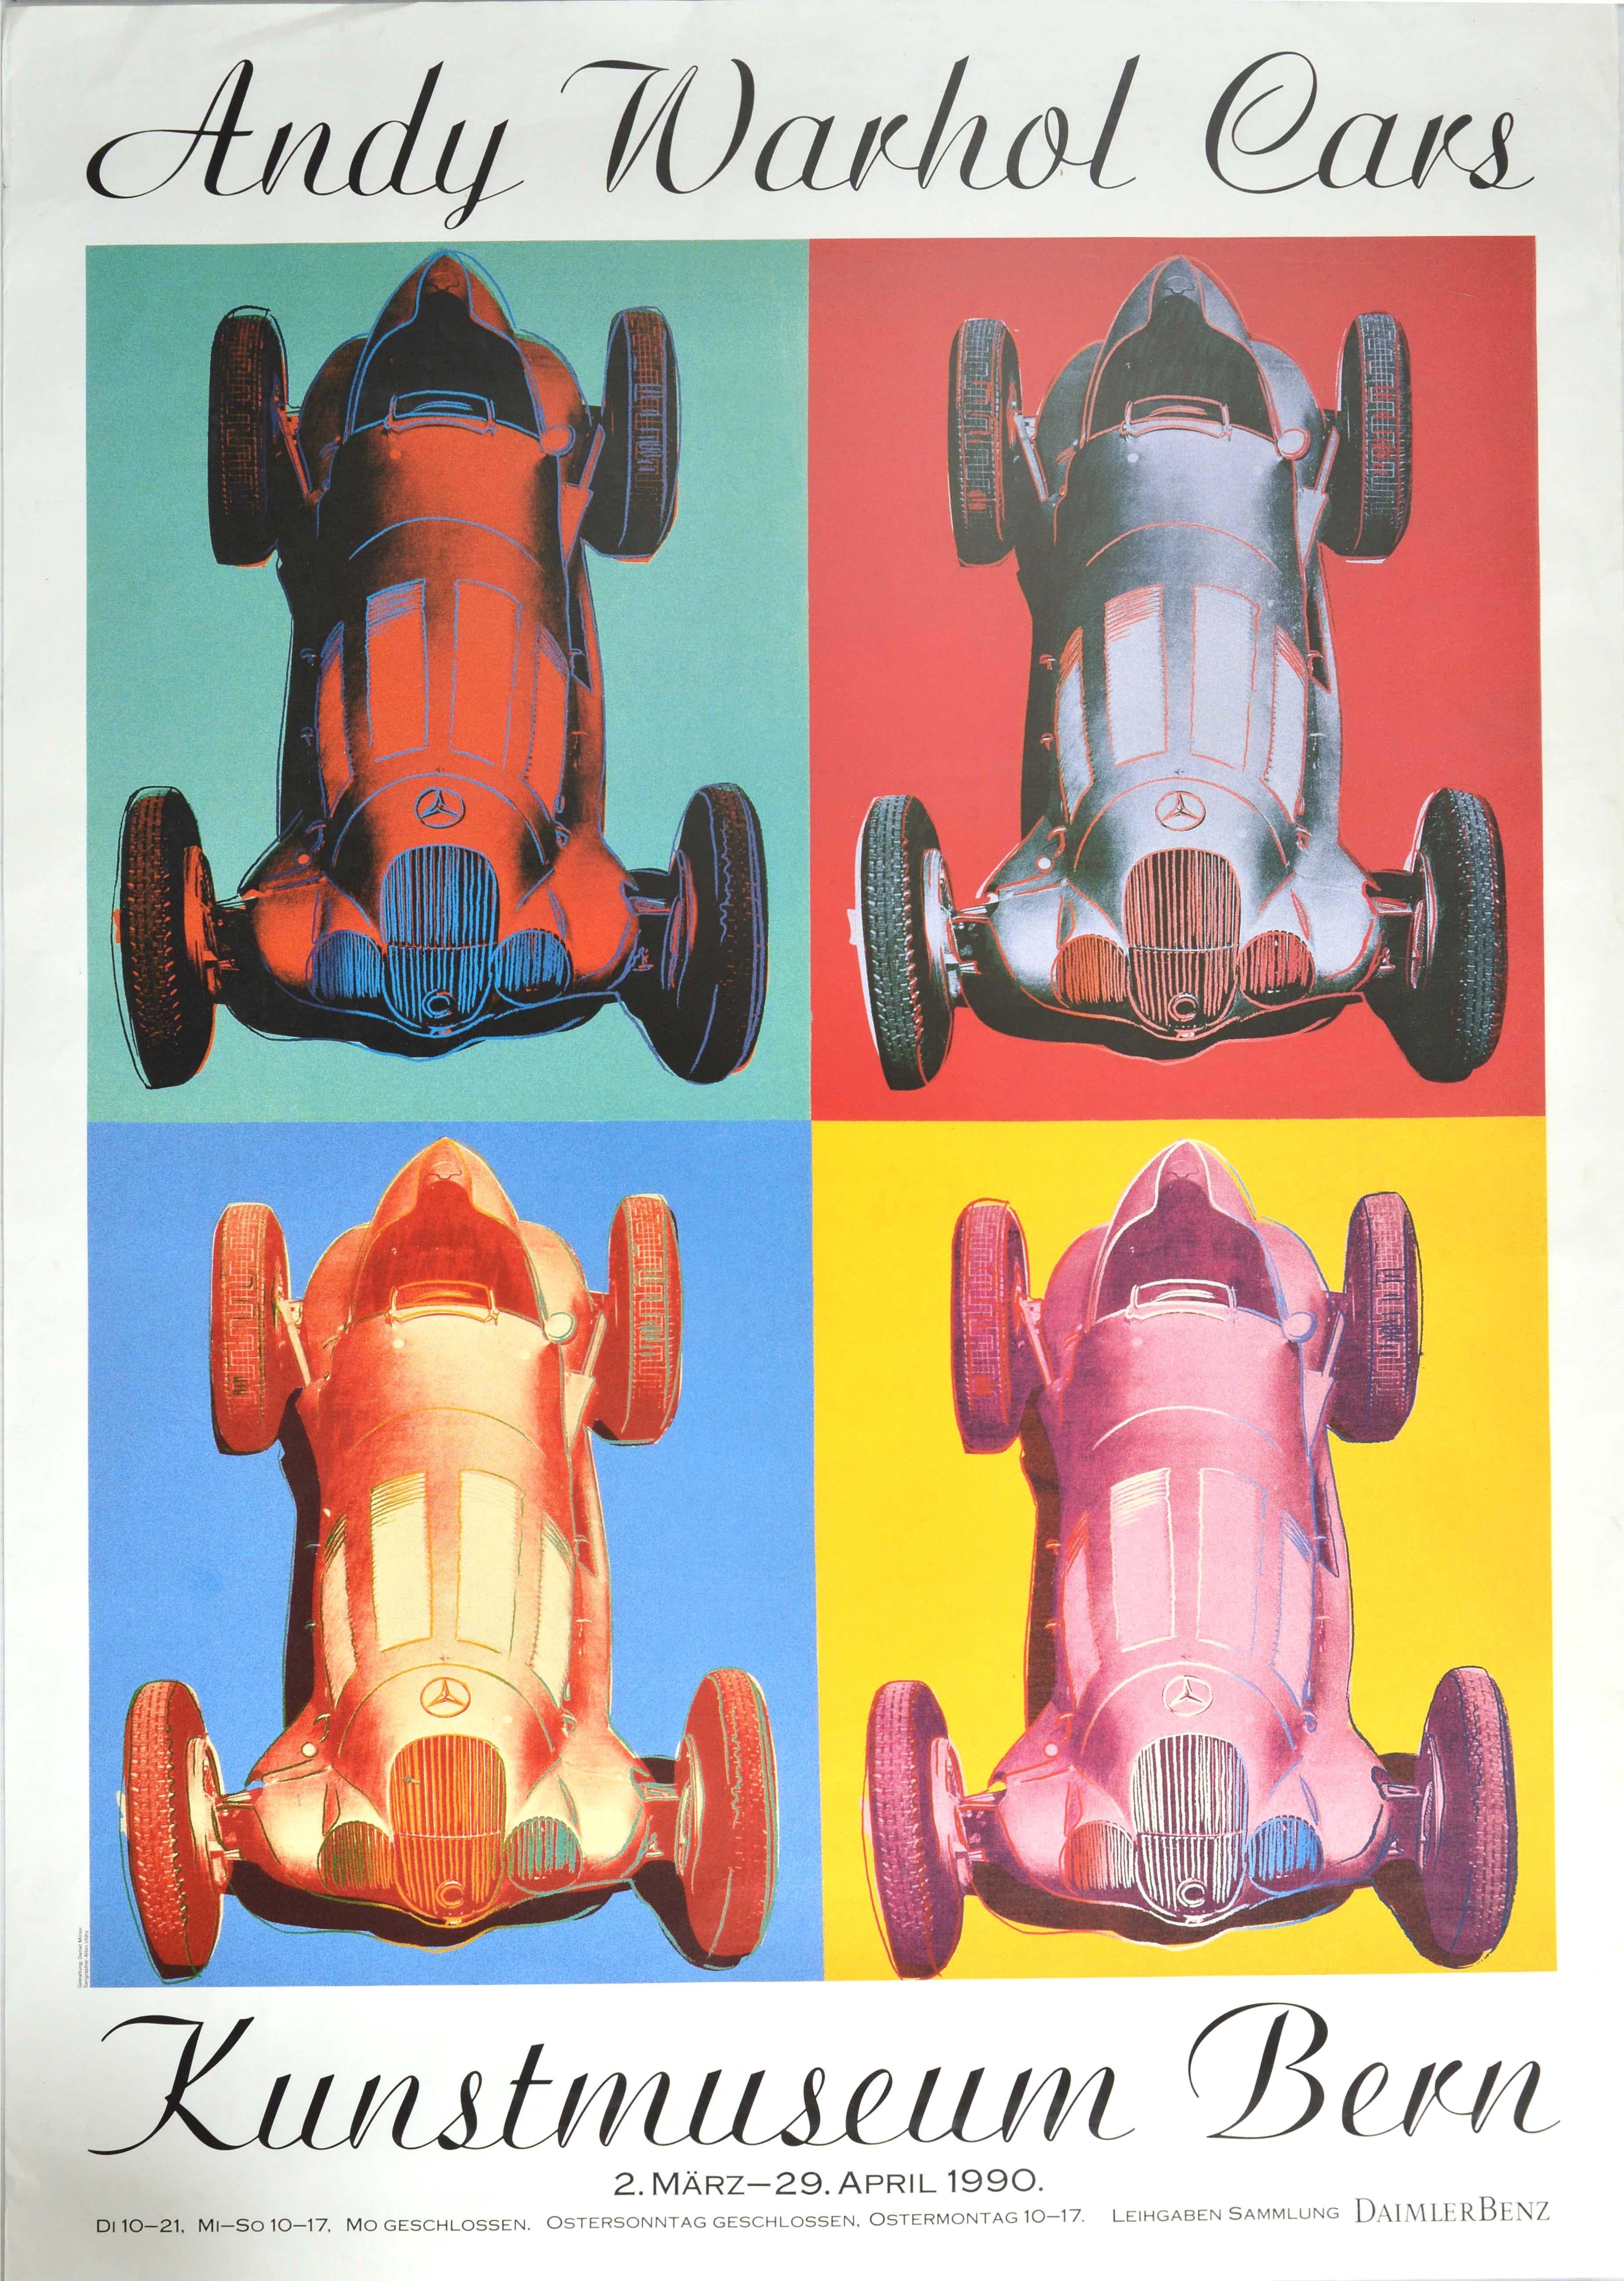 andy warhol cars poster